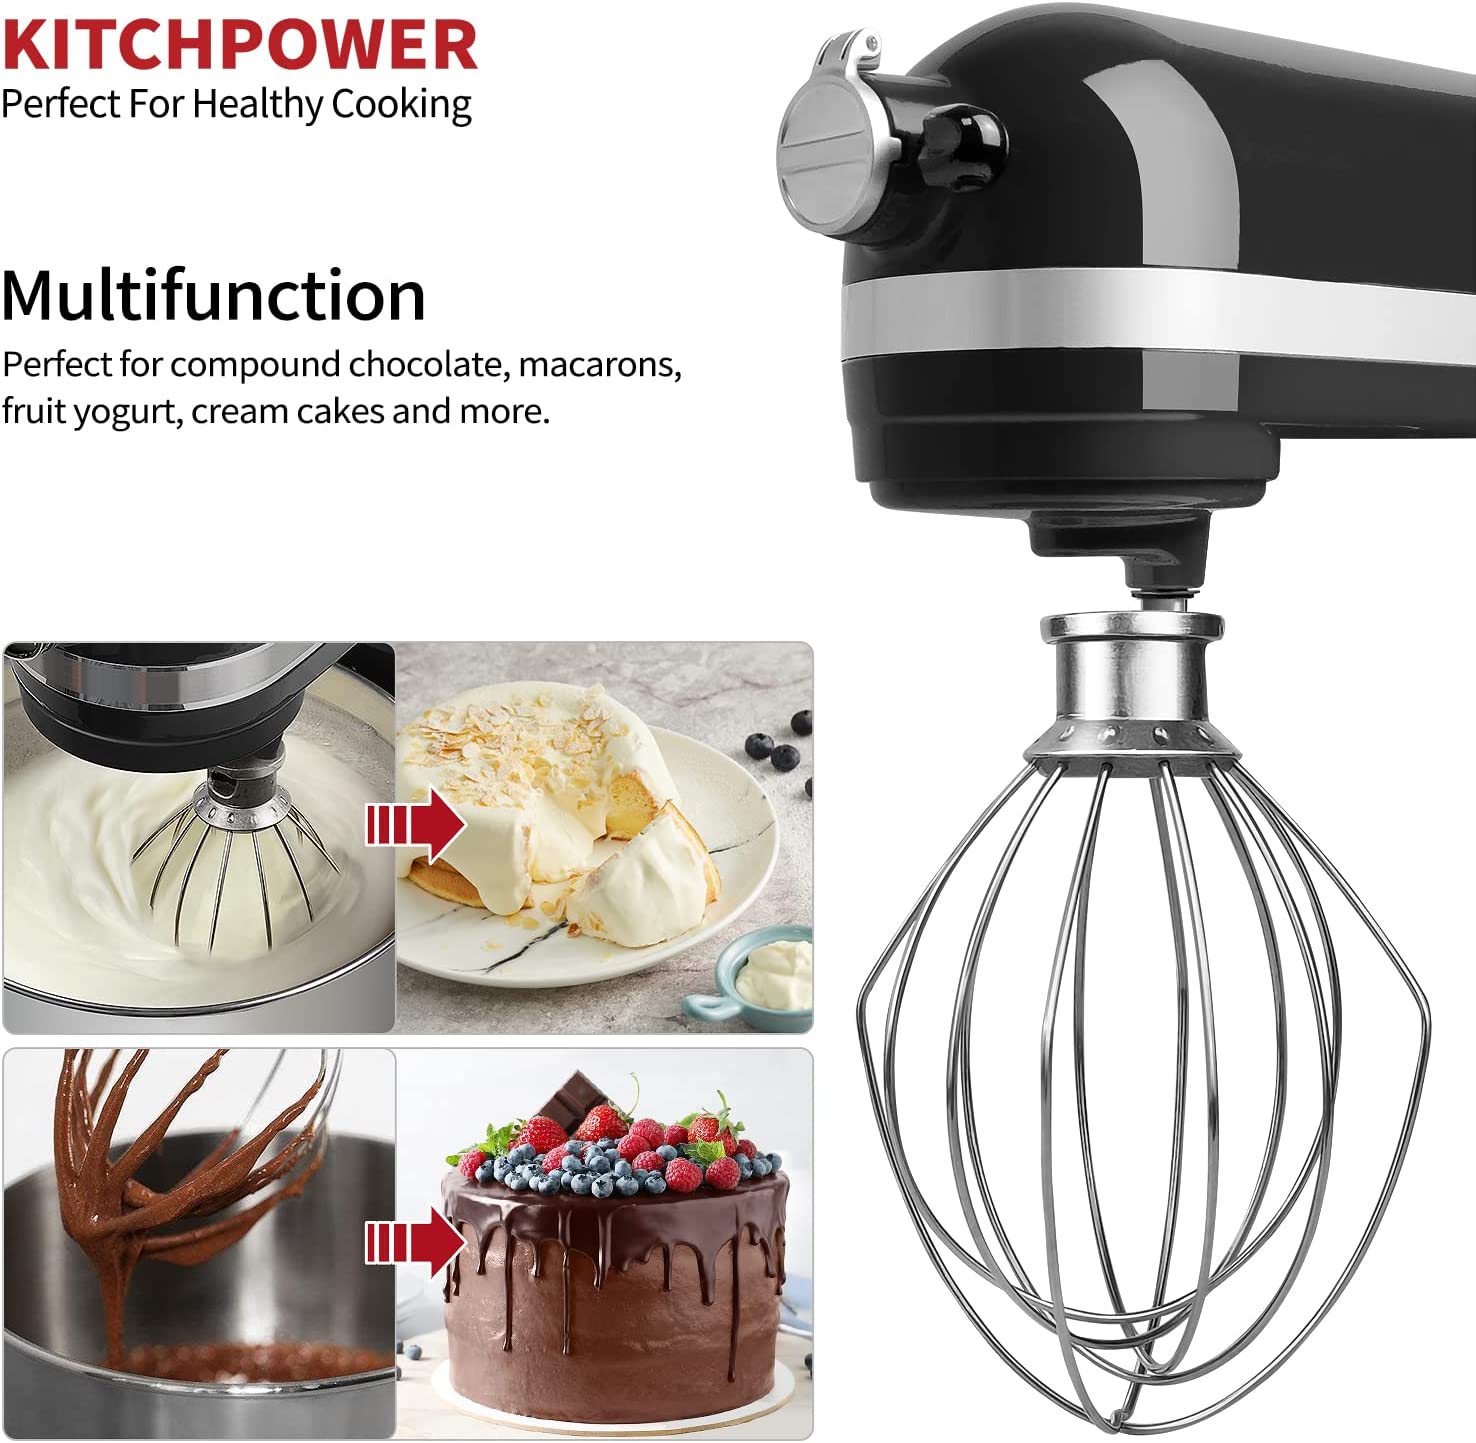 Attachment for Tilt-Head Stand Mixer for KitchenAid